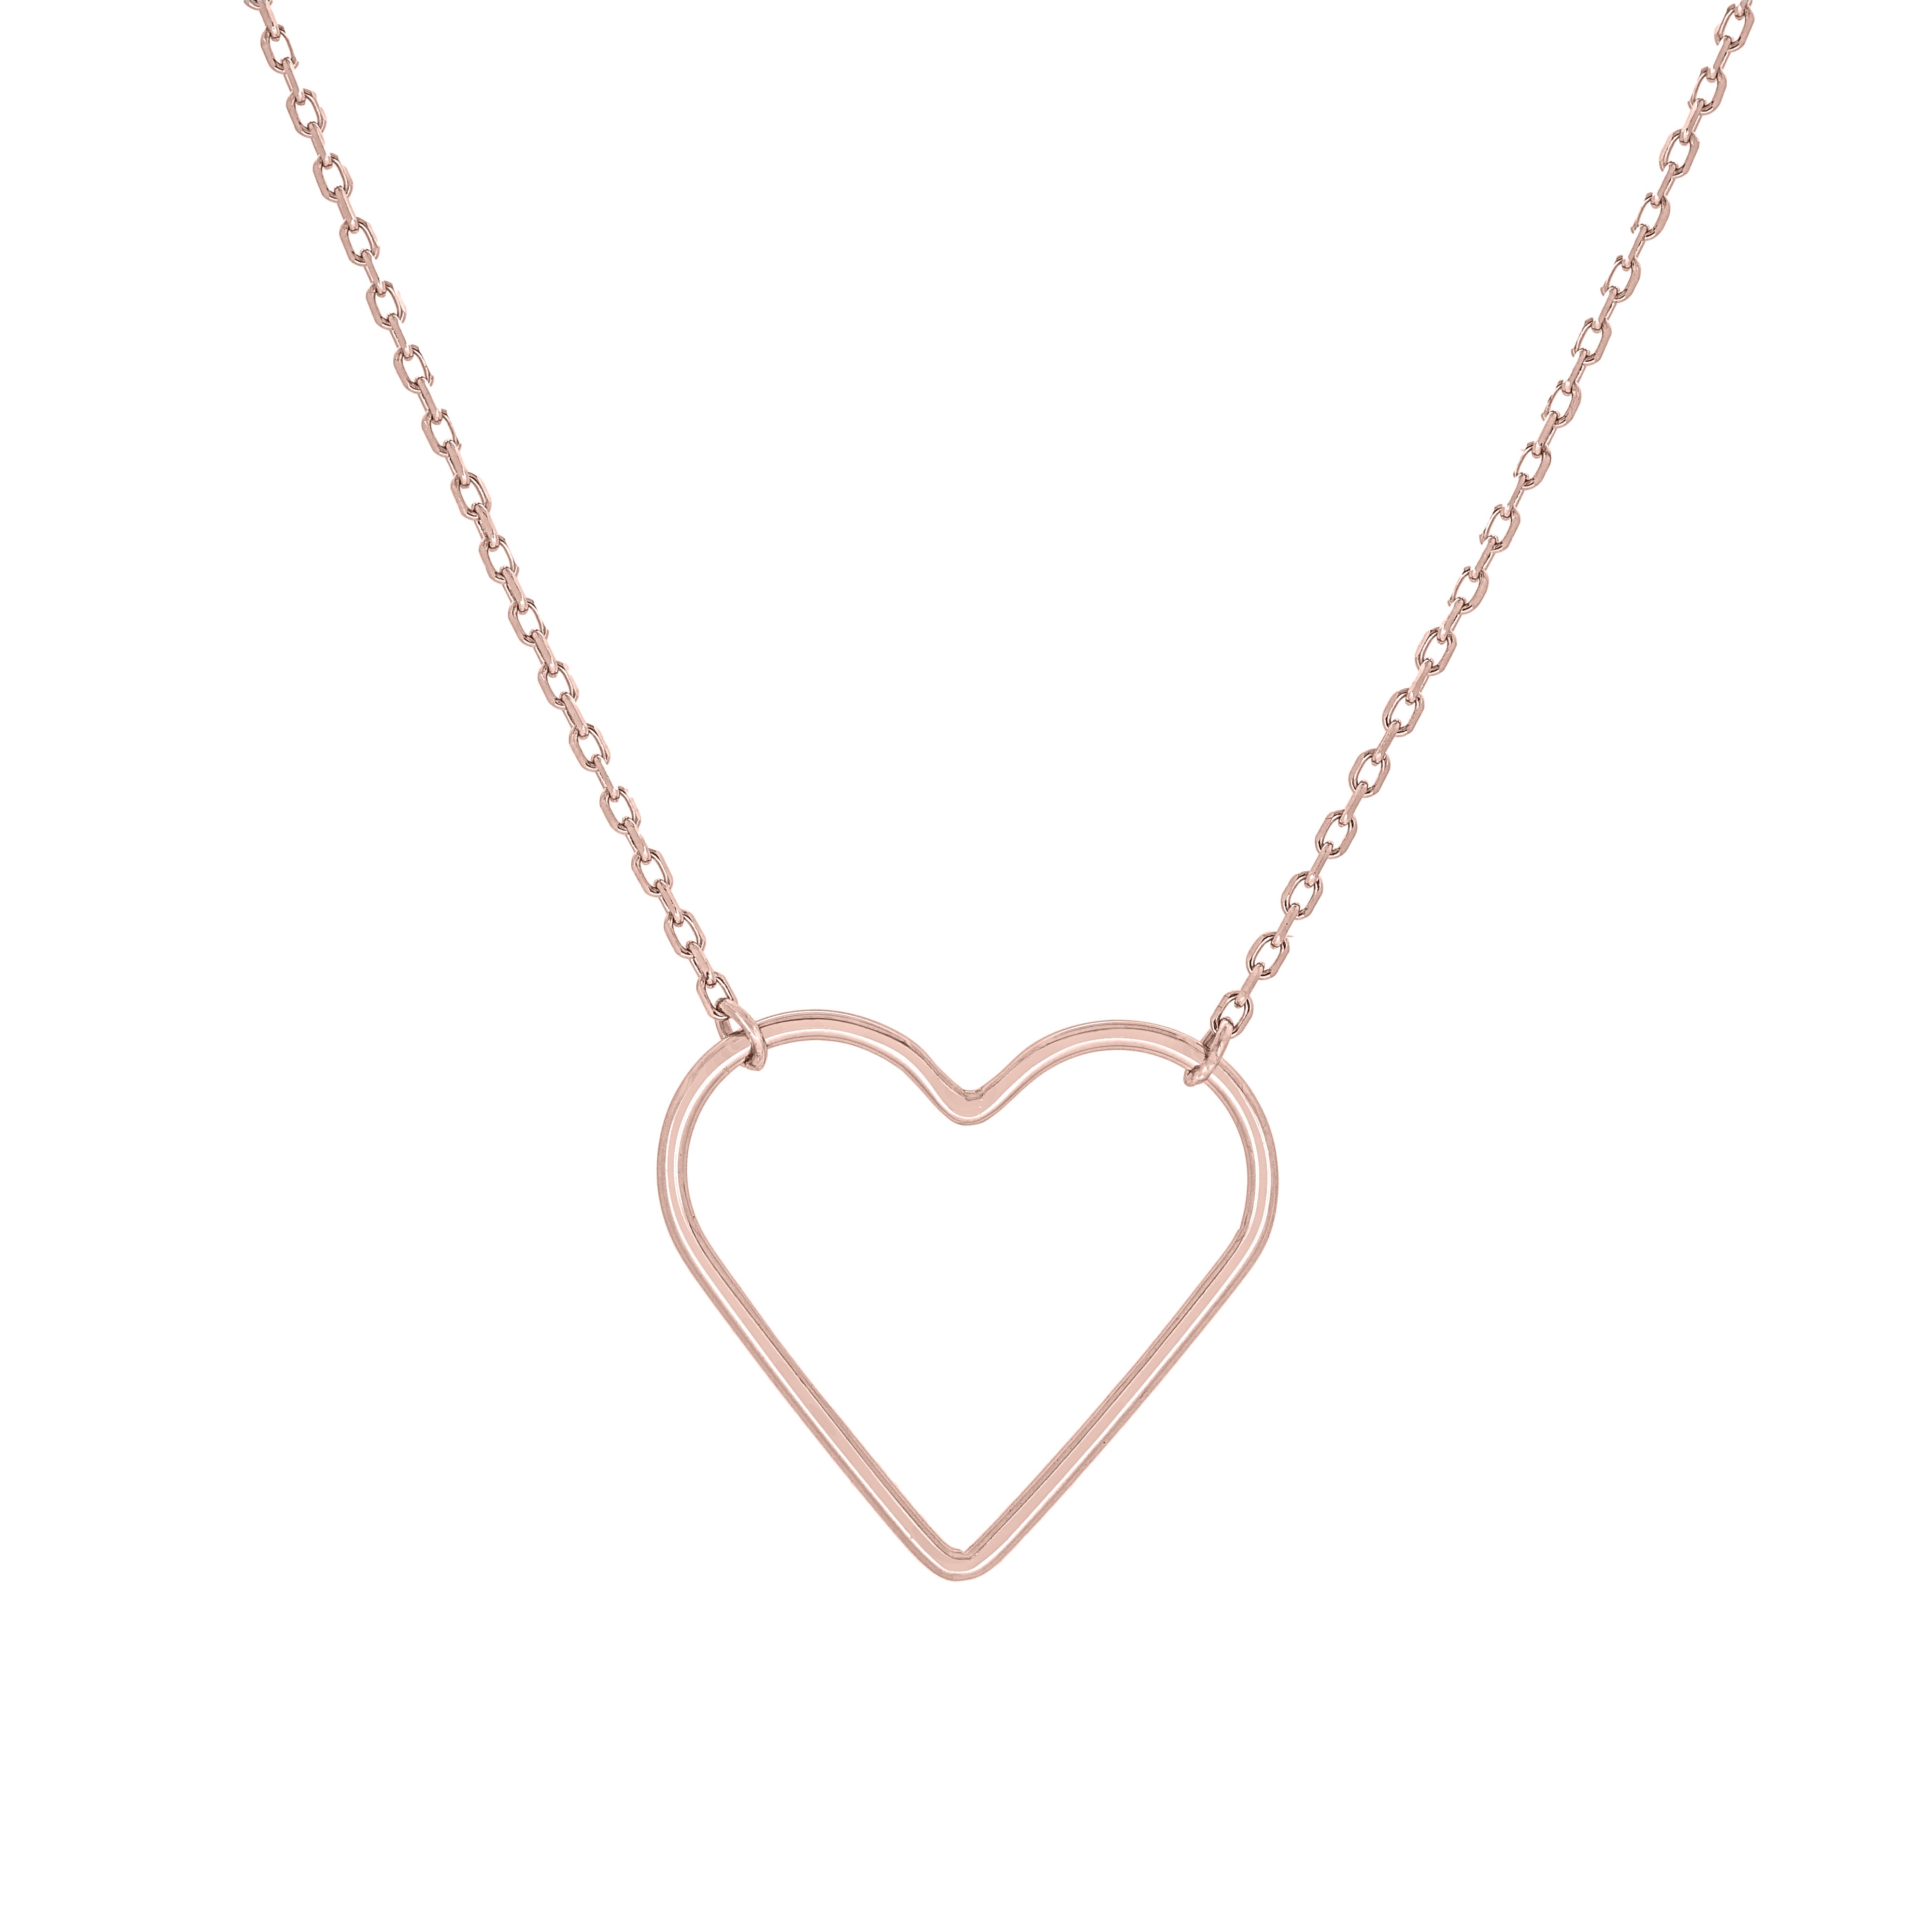 (100088A) Heart Necklace In Sterling Silver and Rose Gold Plate